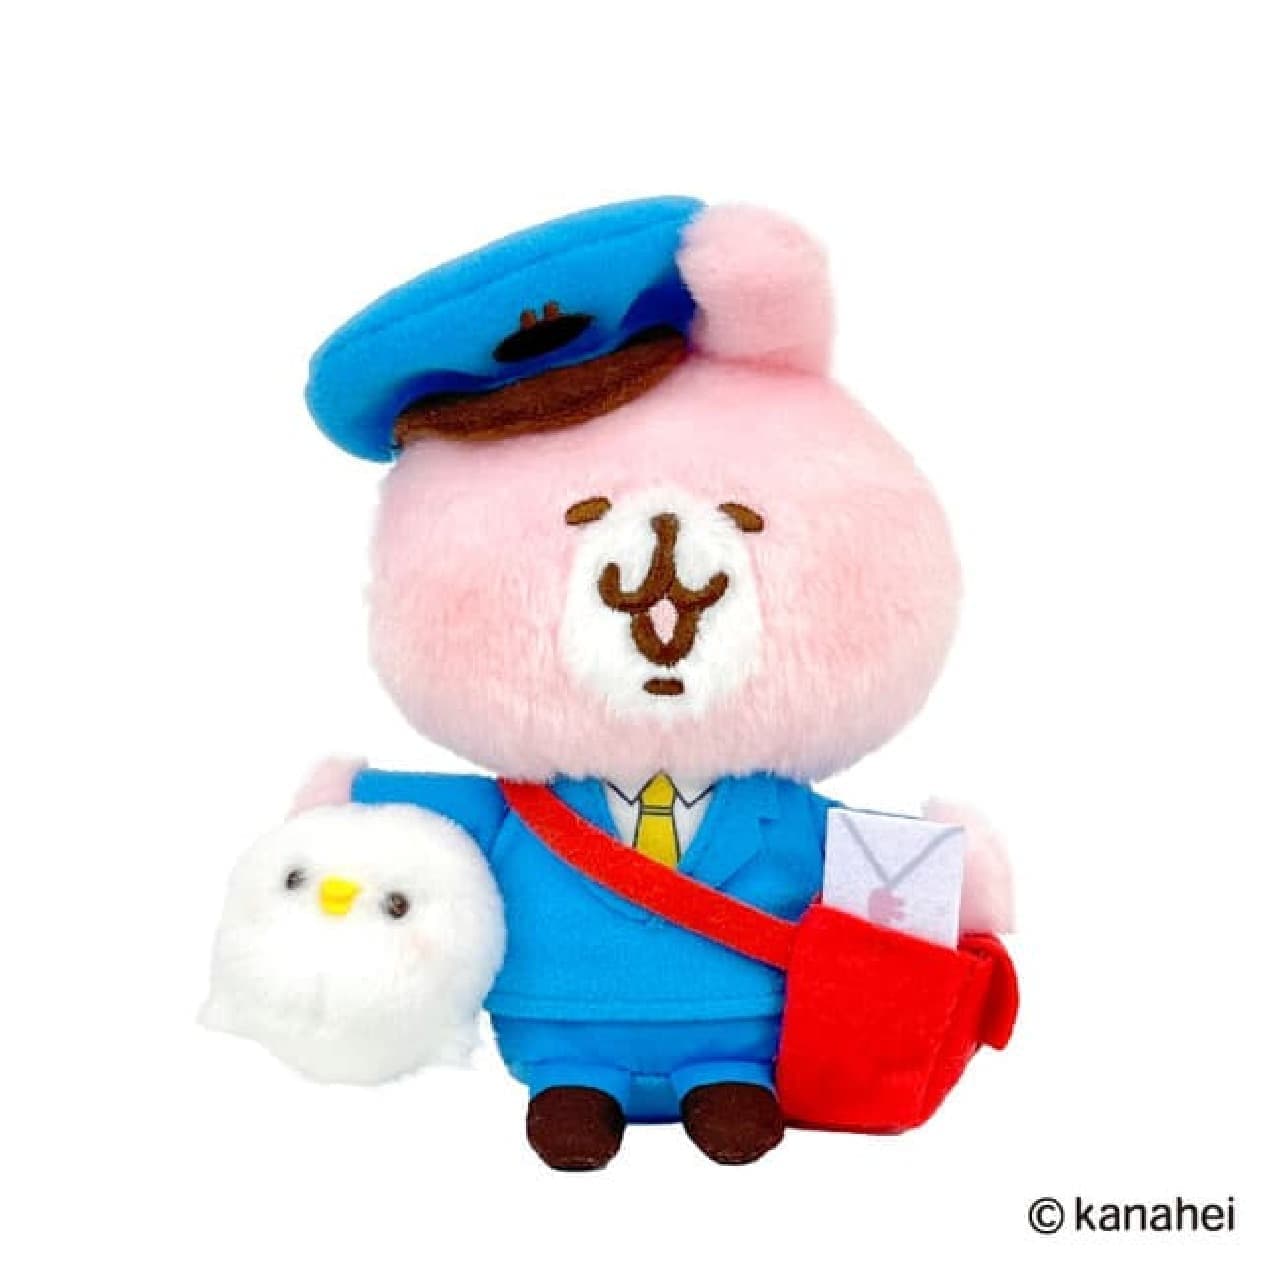 Post Office "Kanahei 20th Anniversary Commemorative Goods" frame stamp set, plush toy, hand towel, pouch, sticker